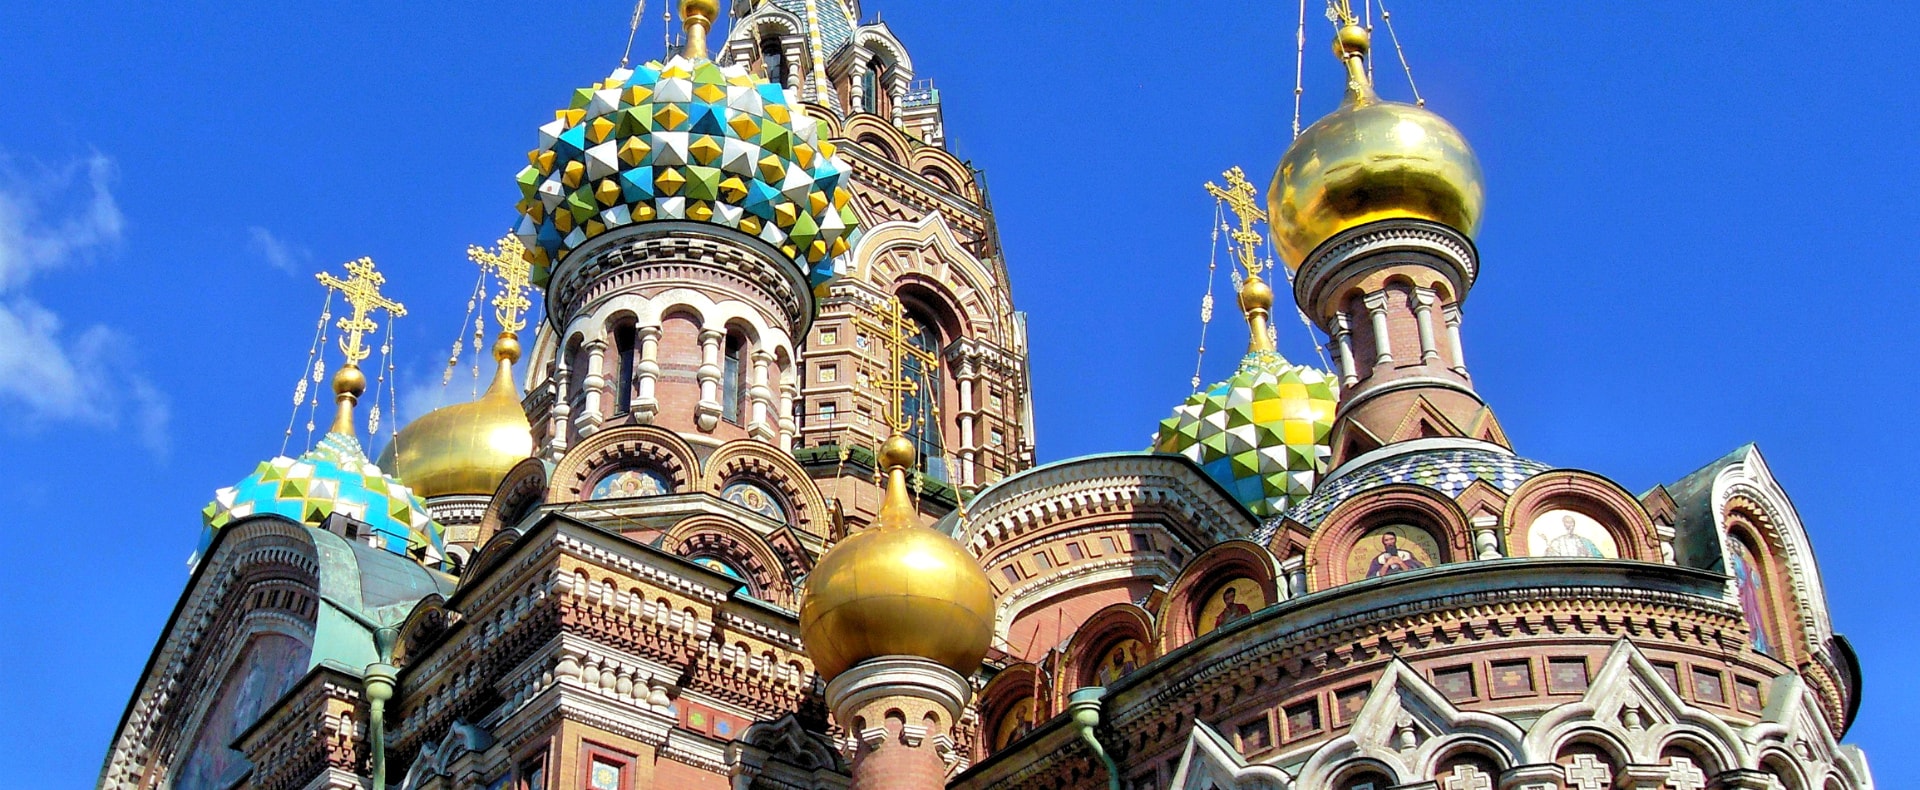 Church of the Savior on Spilled Blood, St. Petersburg